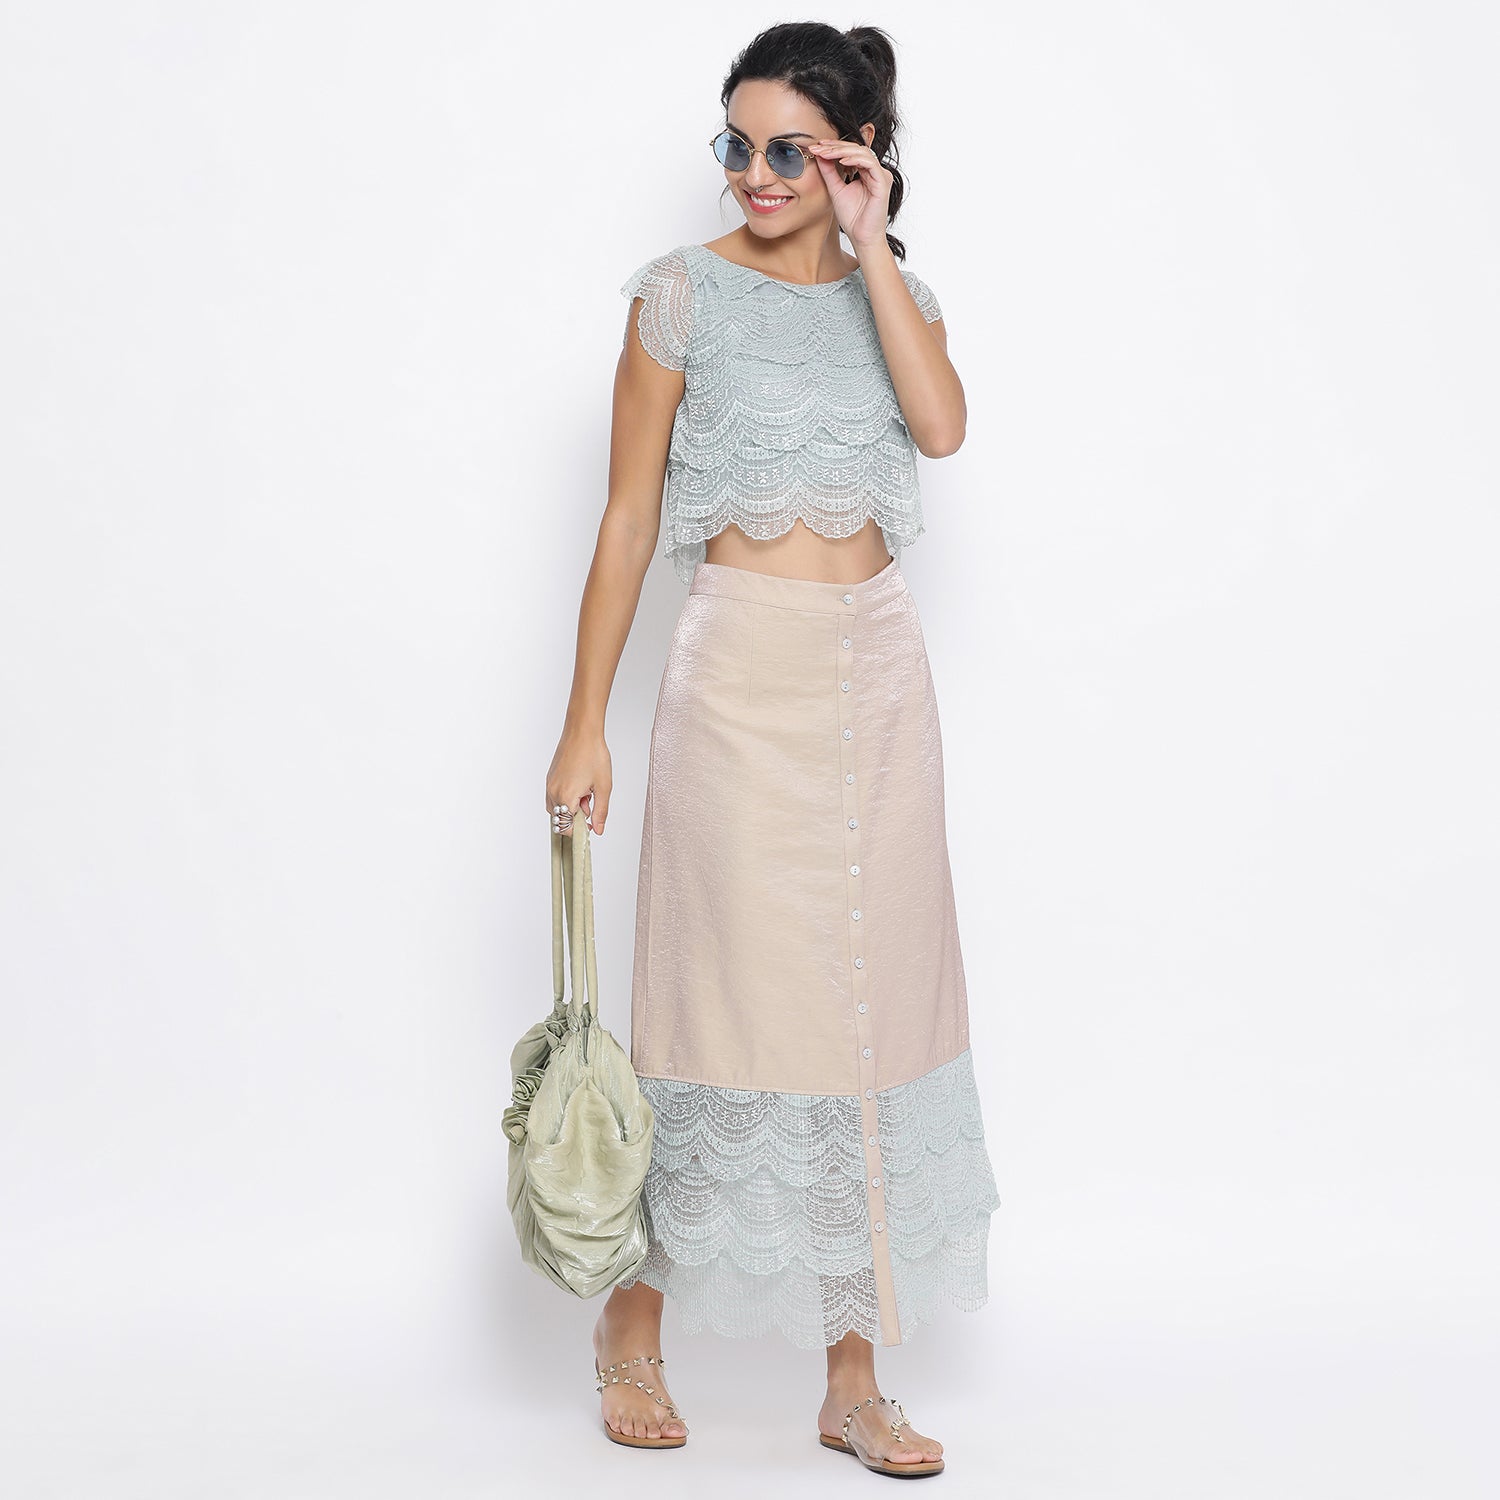 Beige Skirt With Scallop Lace At Hem